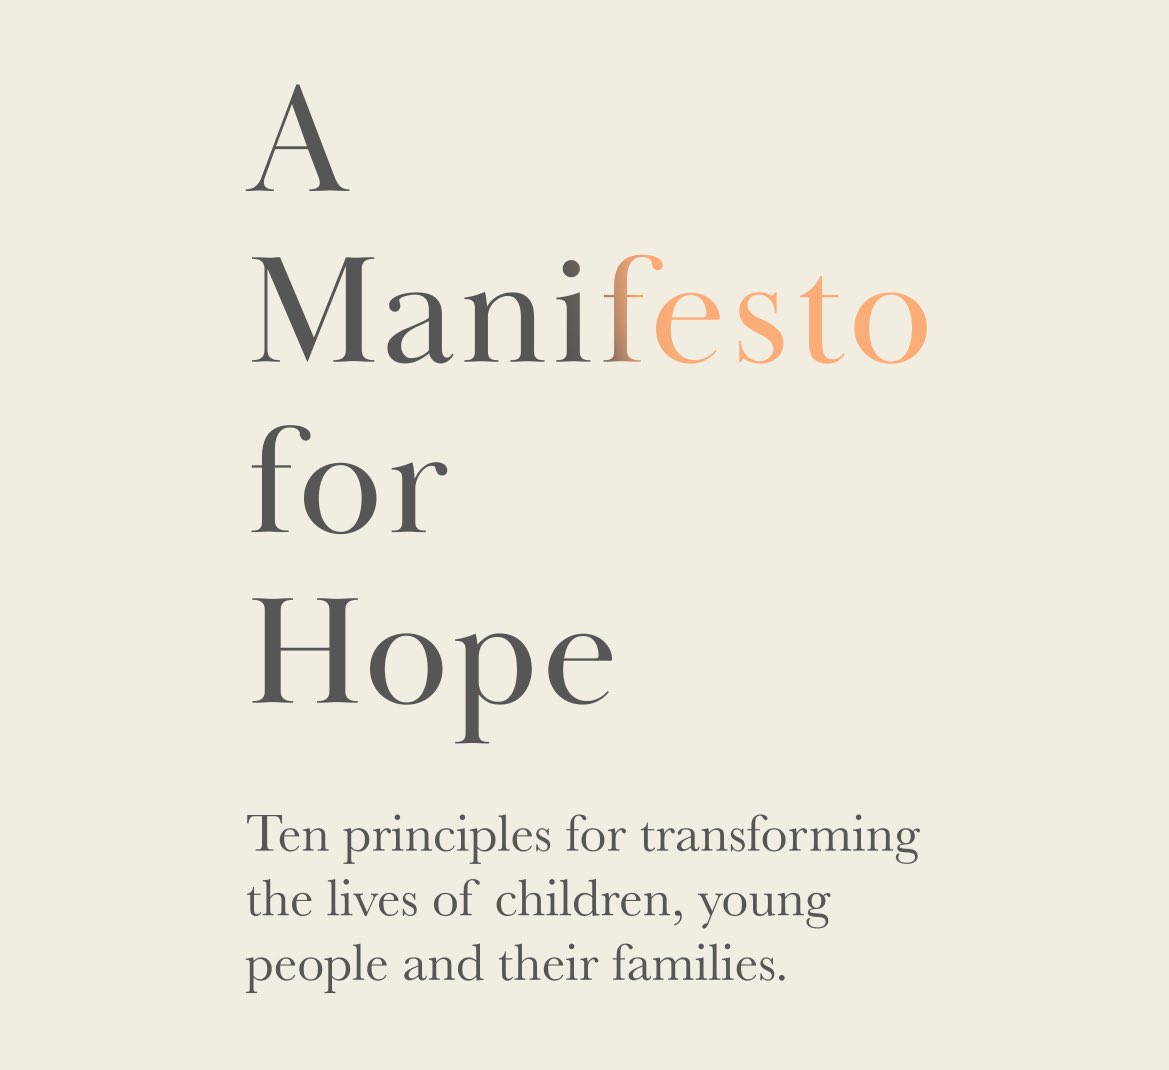 “With social services & the NHS on their knees, we need a transformational reset; one that empowers local charities, grassroots movements & faith groups in a partnership approach to health care.” Listen to my podcast series with a host of expert guests at manifesto.oasisuk.org